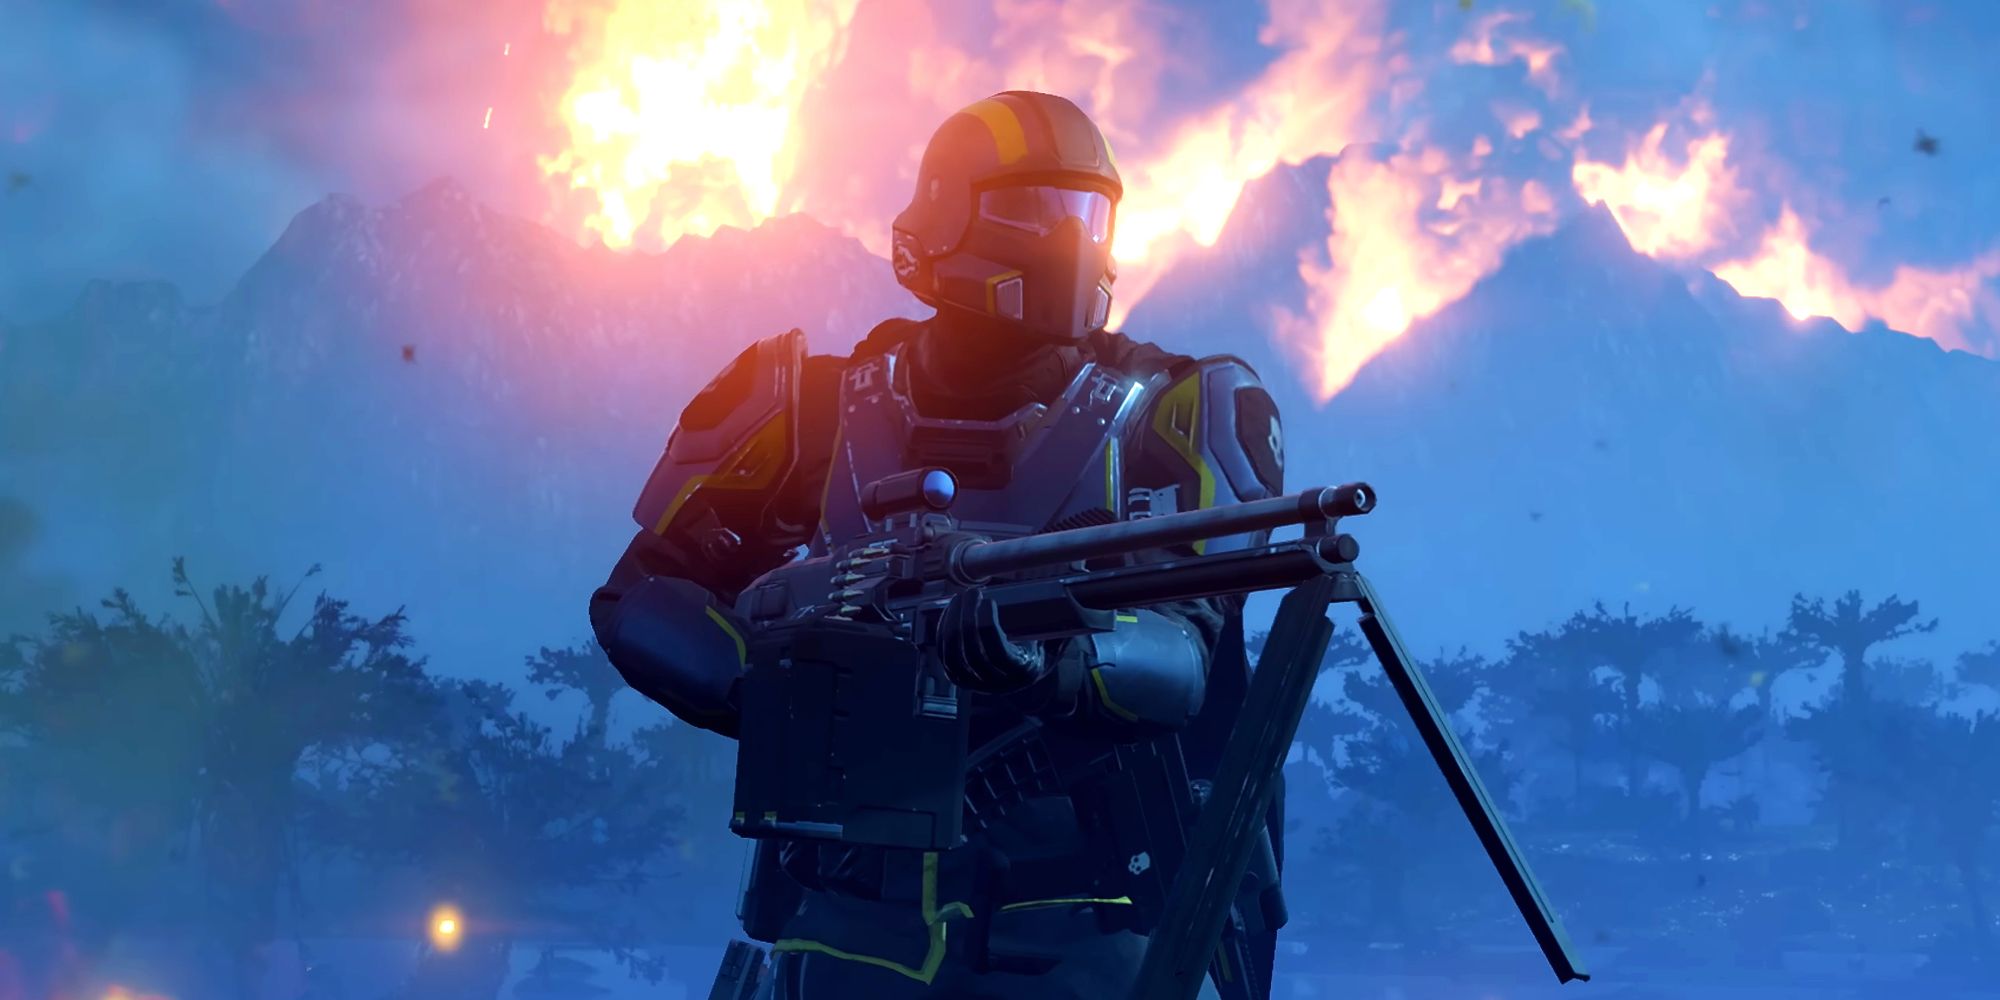 A heavily armored sci-fi soldier is holding a heavy machine gun. Behind them is a forest and some mountains covered in flames.